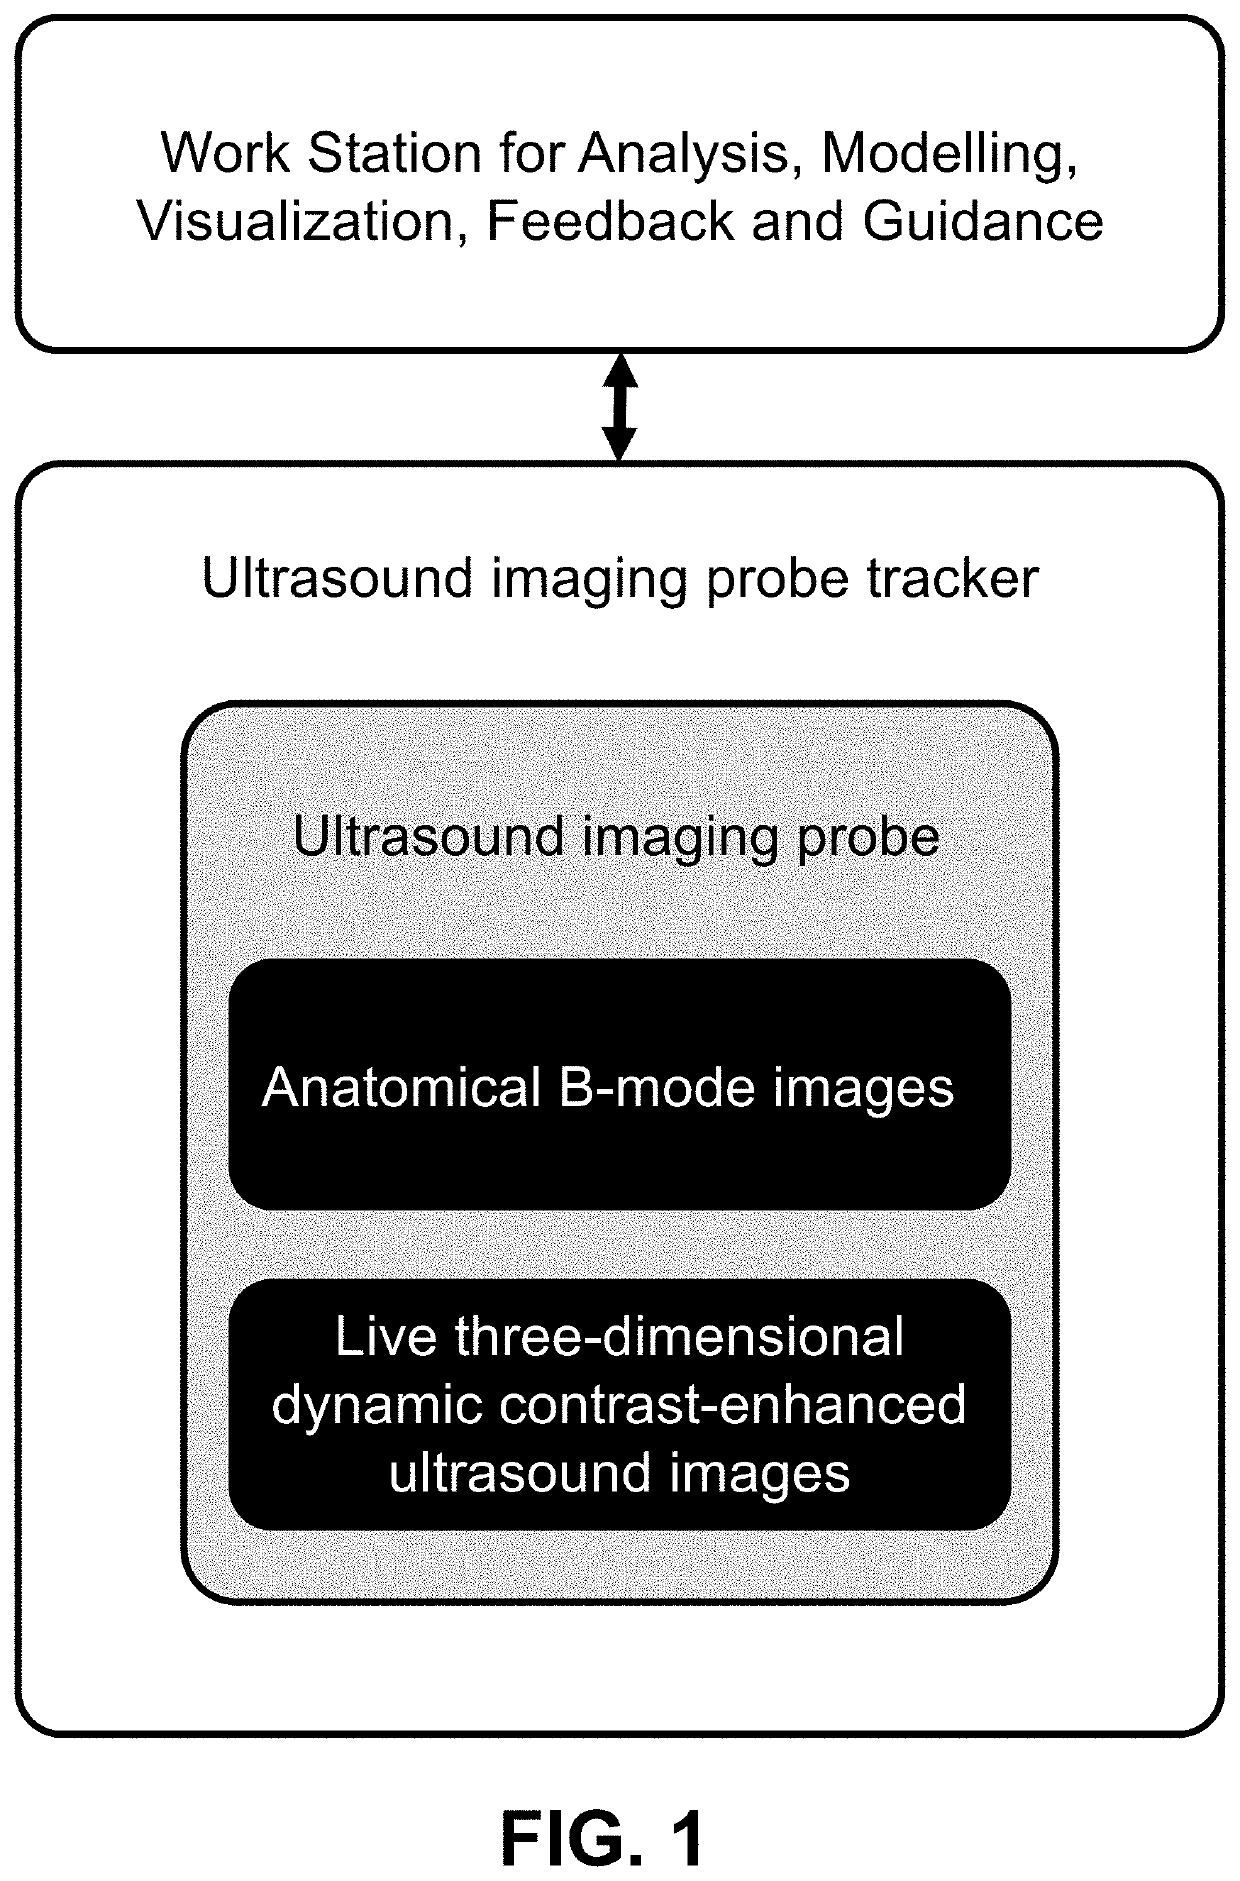 Three-Dimensional Dynamic Contrast Enhanced Ultrasound and Real-Time Intensity Curve Steady-State Verification during Ultrasound-Contrast Infusion